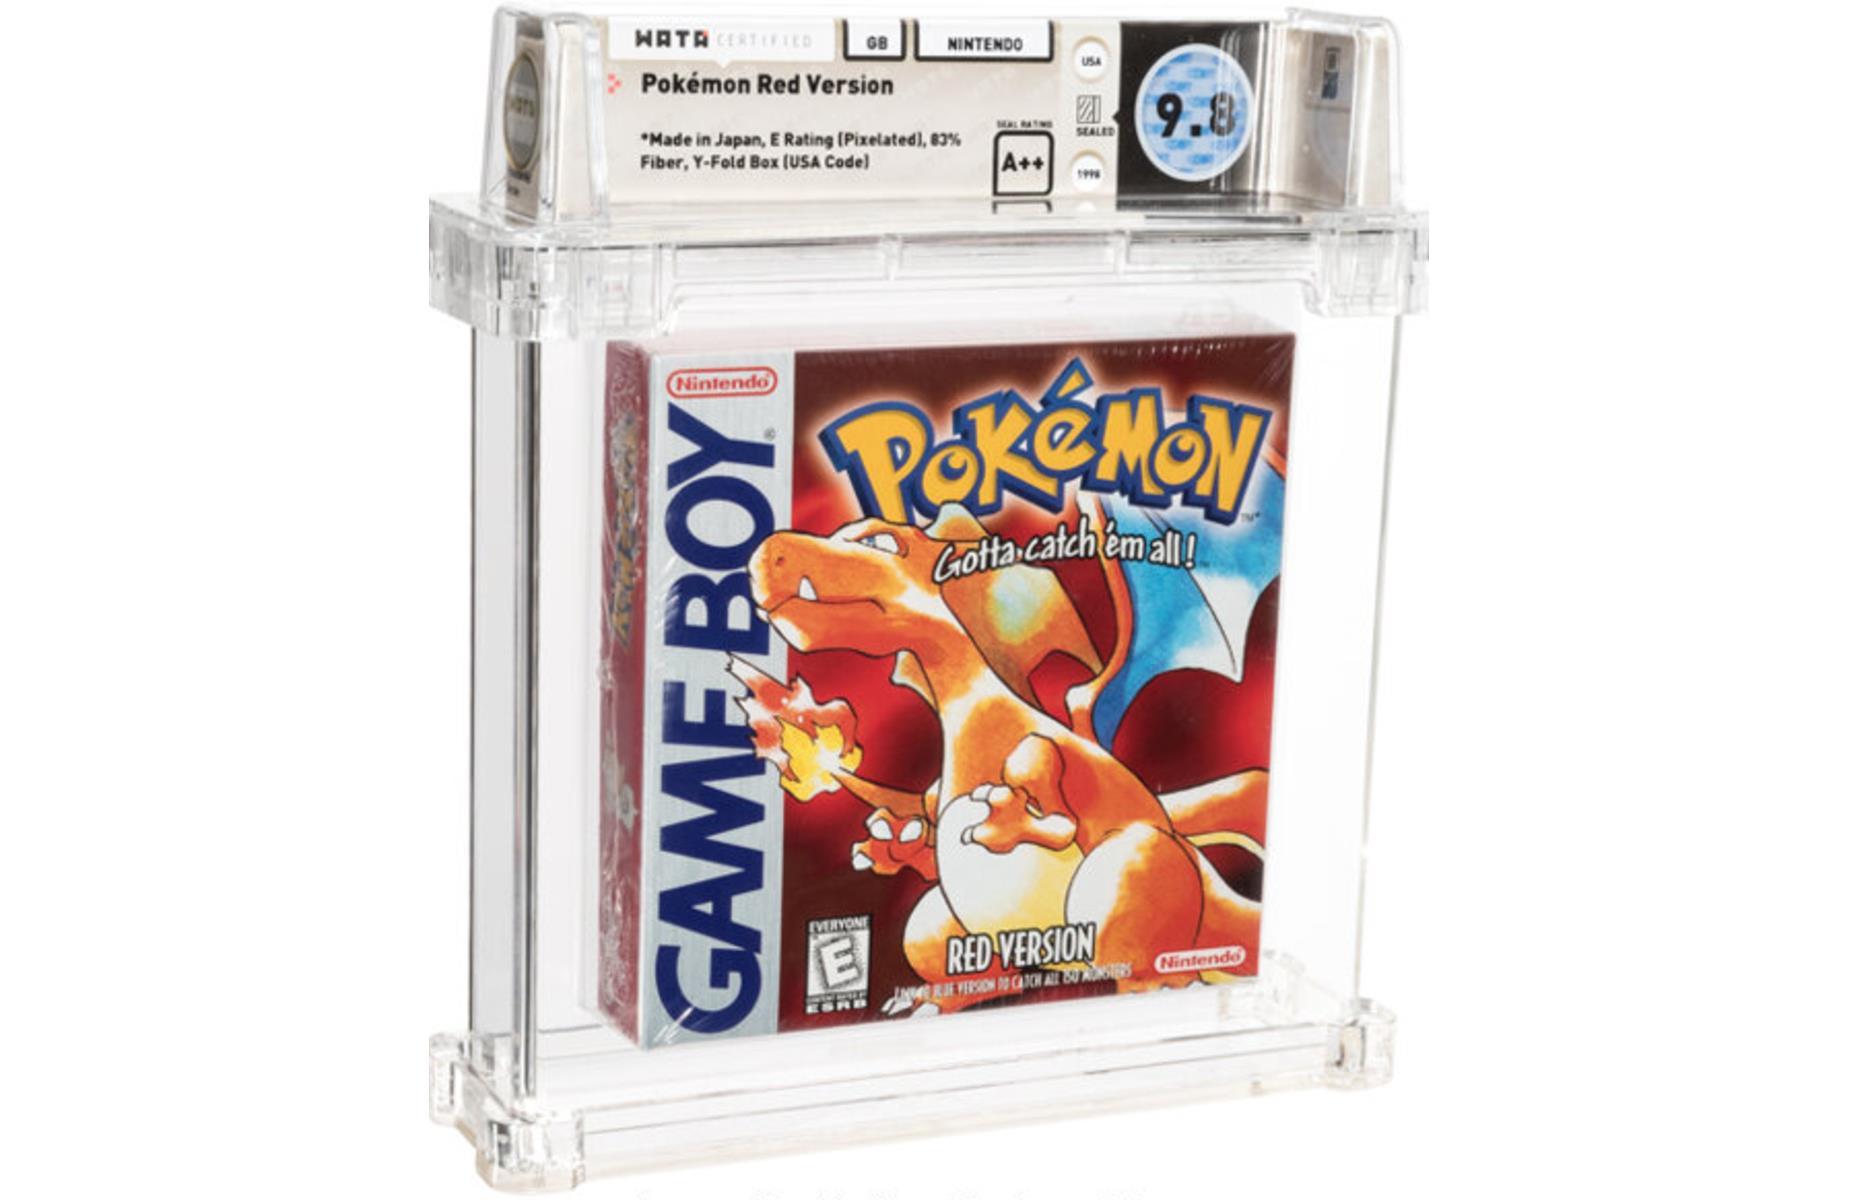 Pokémon Red (Nintendo) for Game Boy, 1998: up to $84,000 (£60.9k)